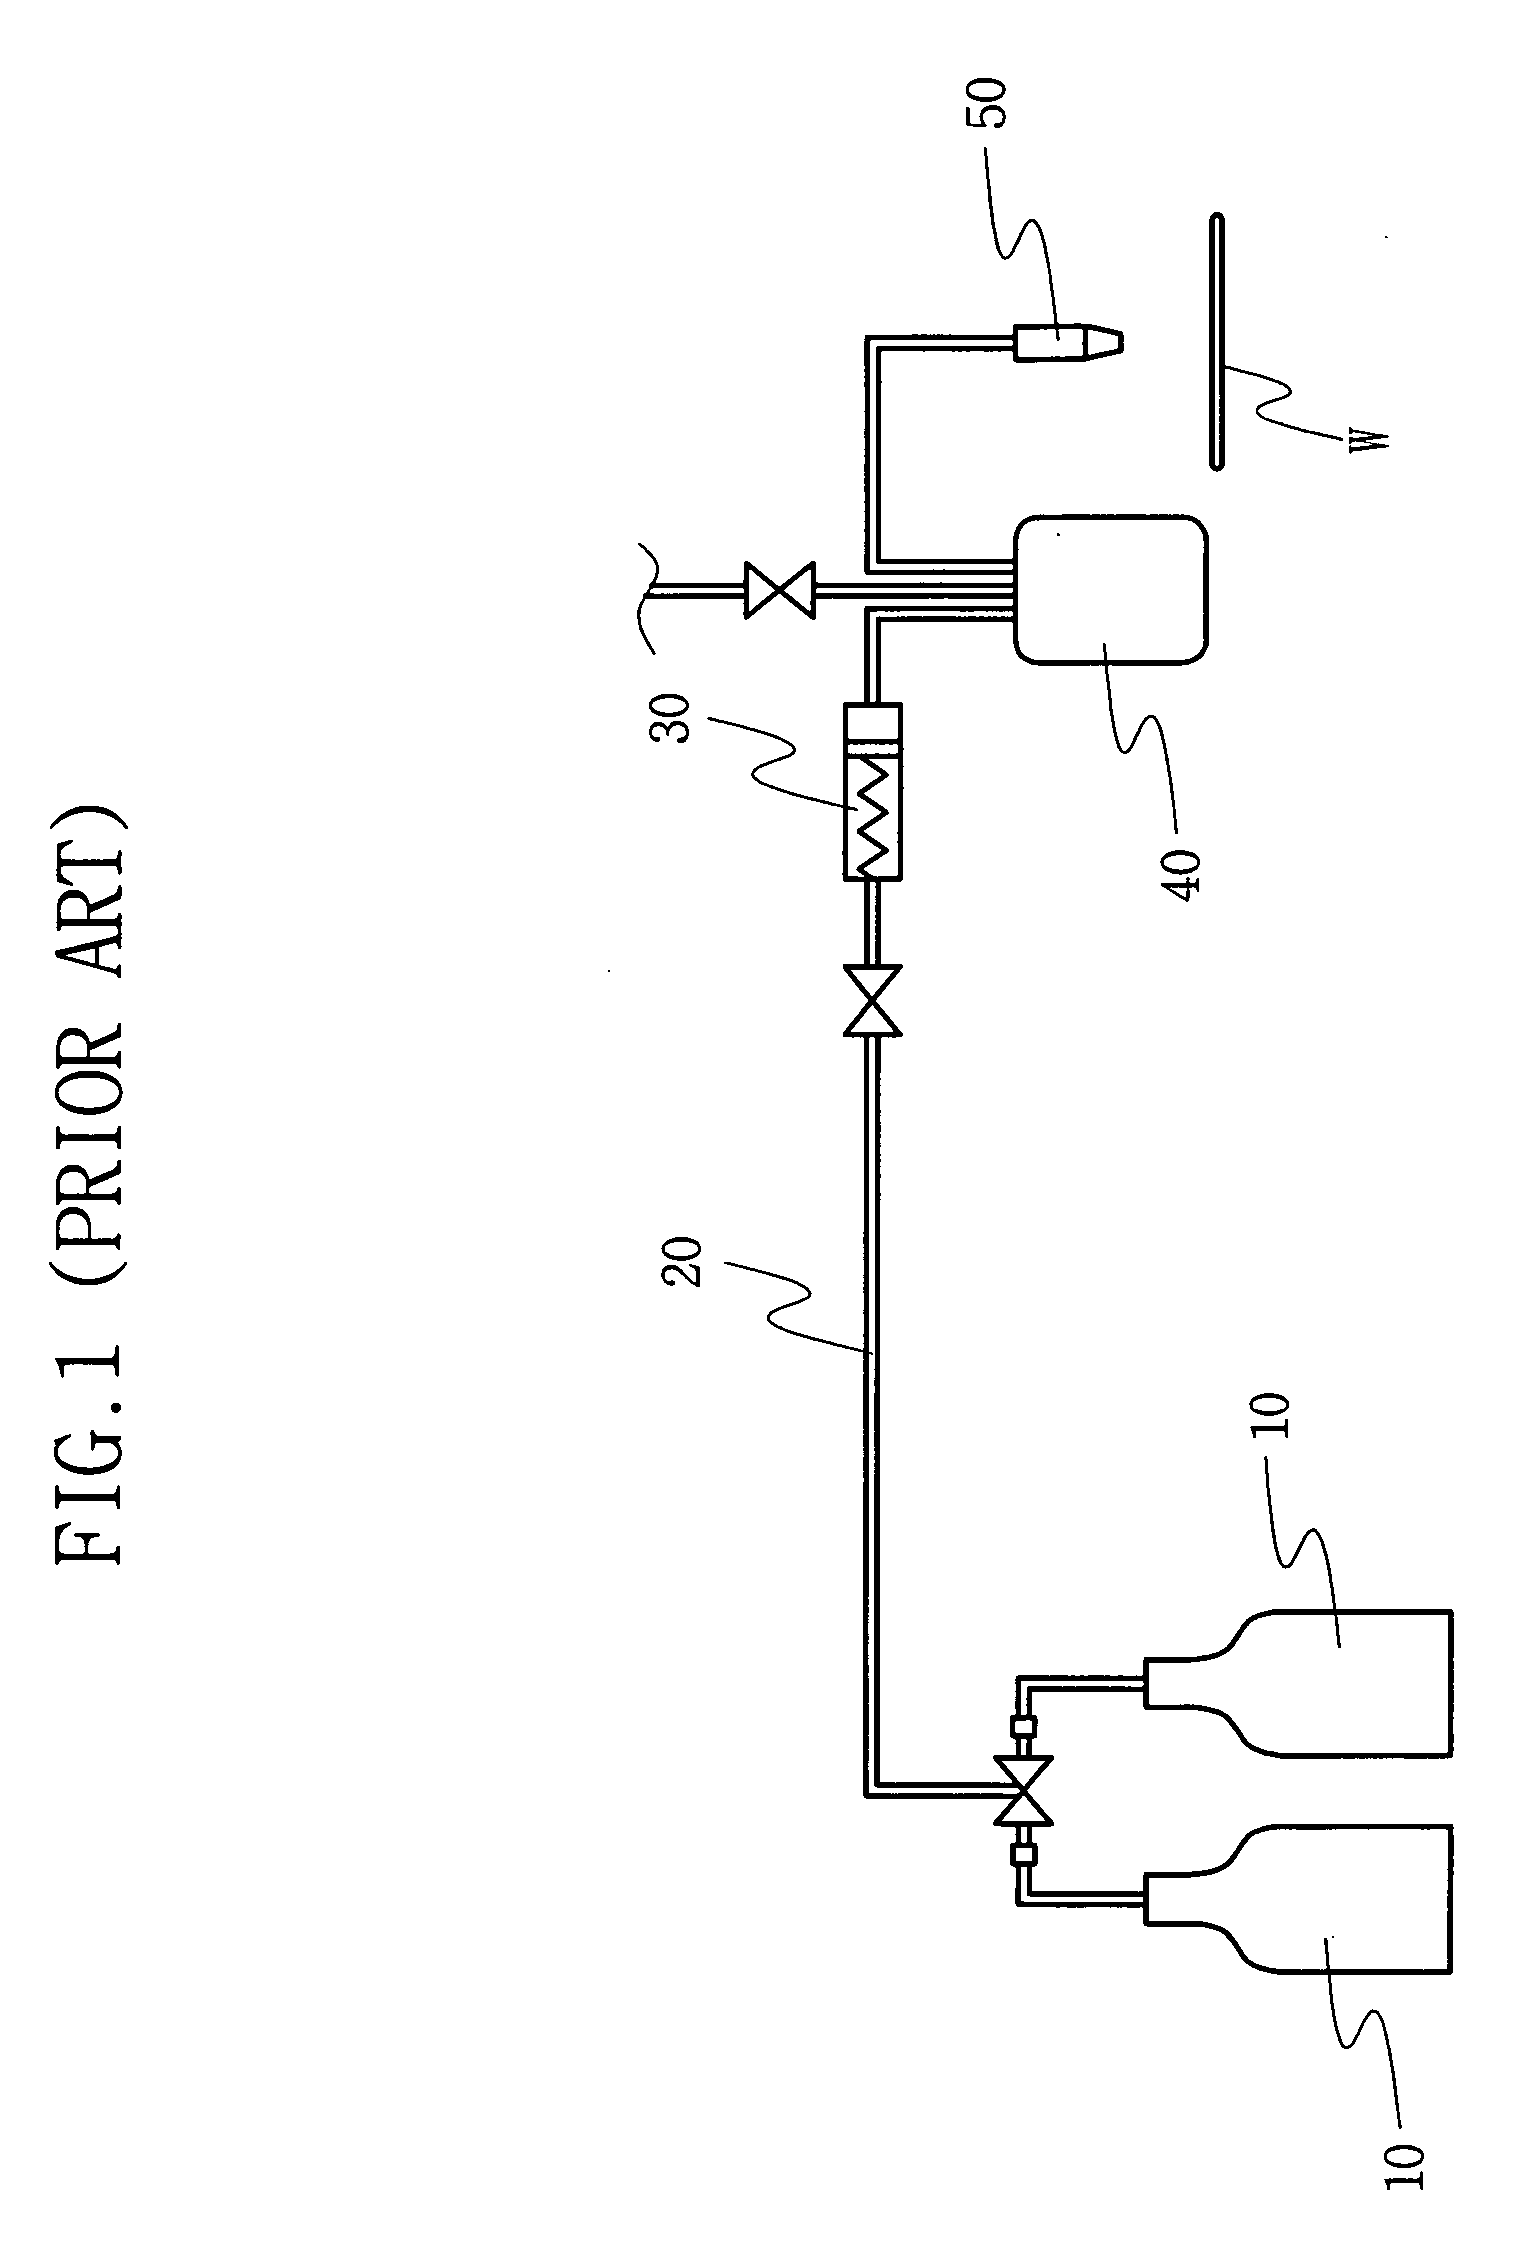 Method of and apparatus for dispensing photoresist in manufacturing semiconductor devices or the like